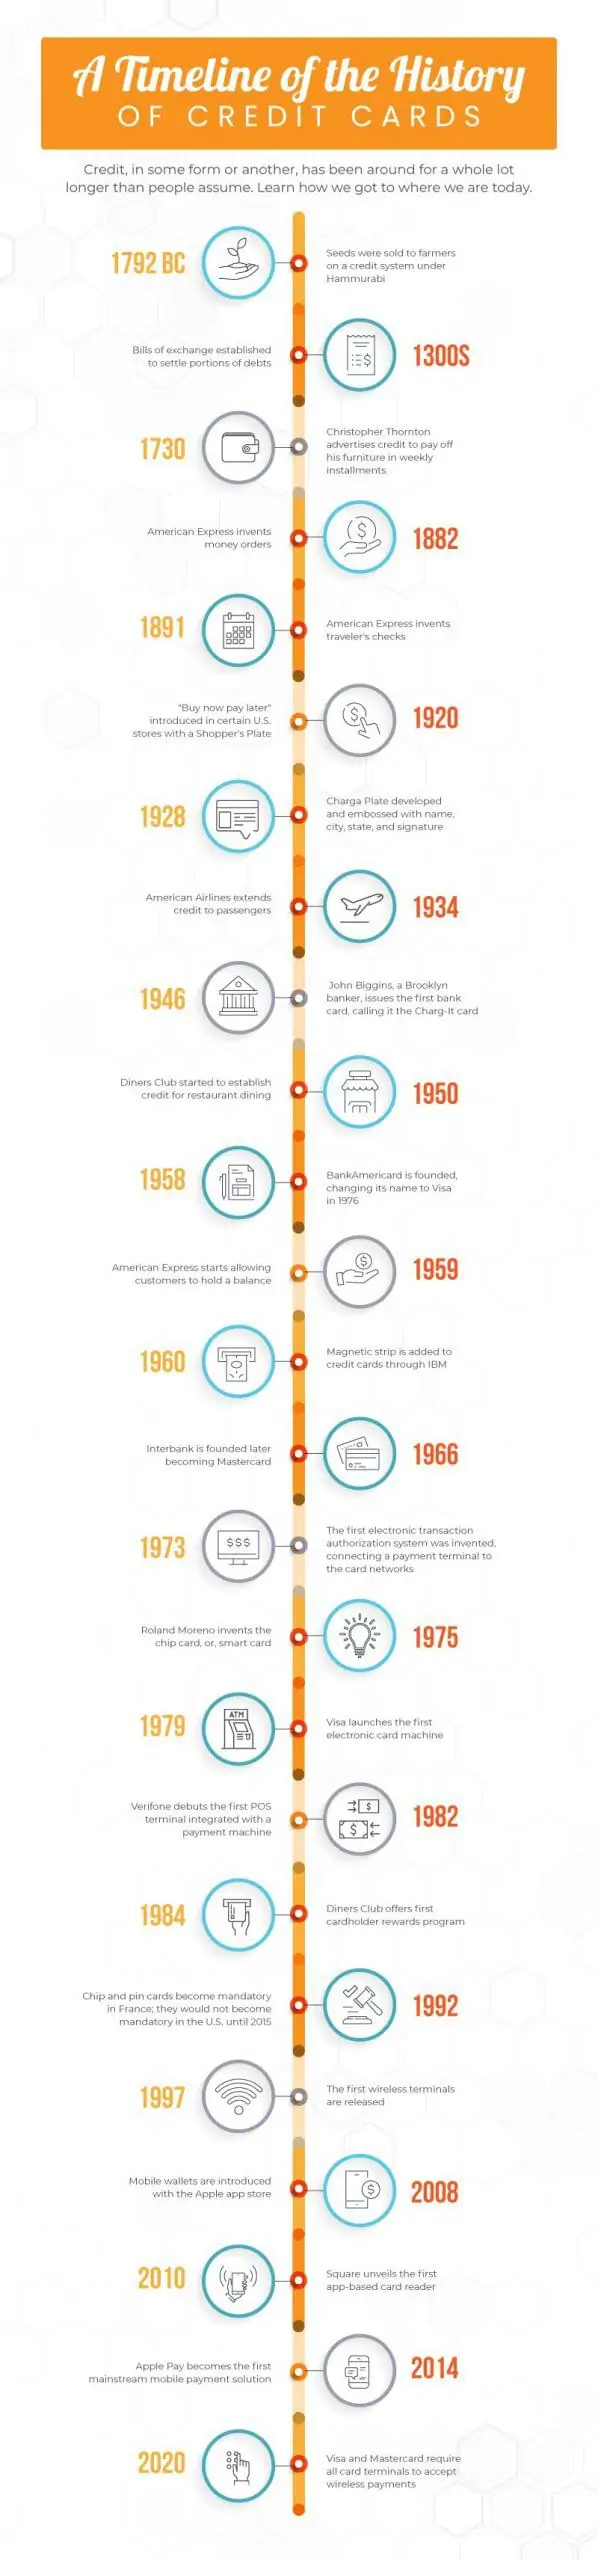 an infographic timeline of the history of credit cards